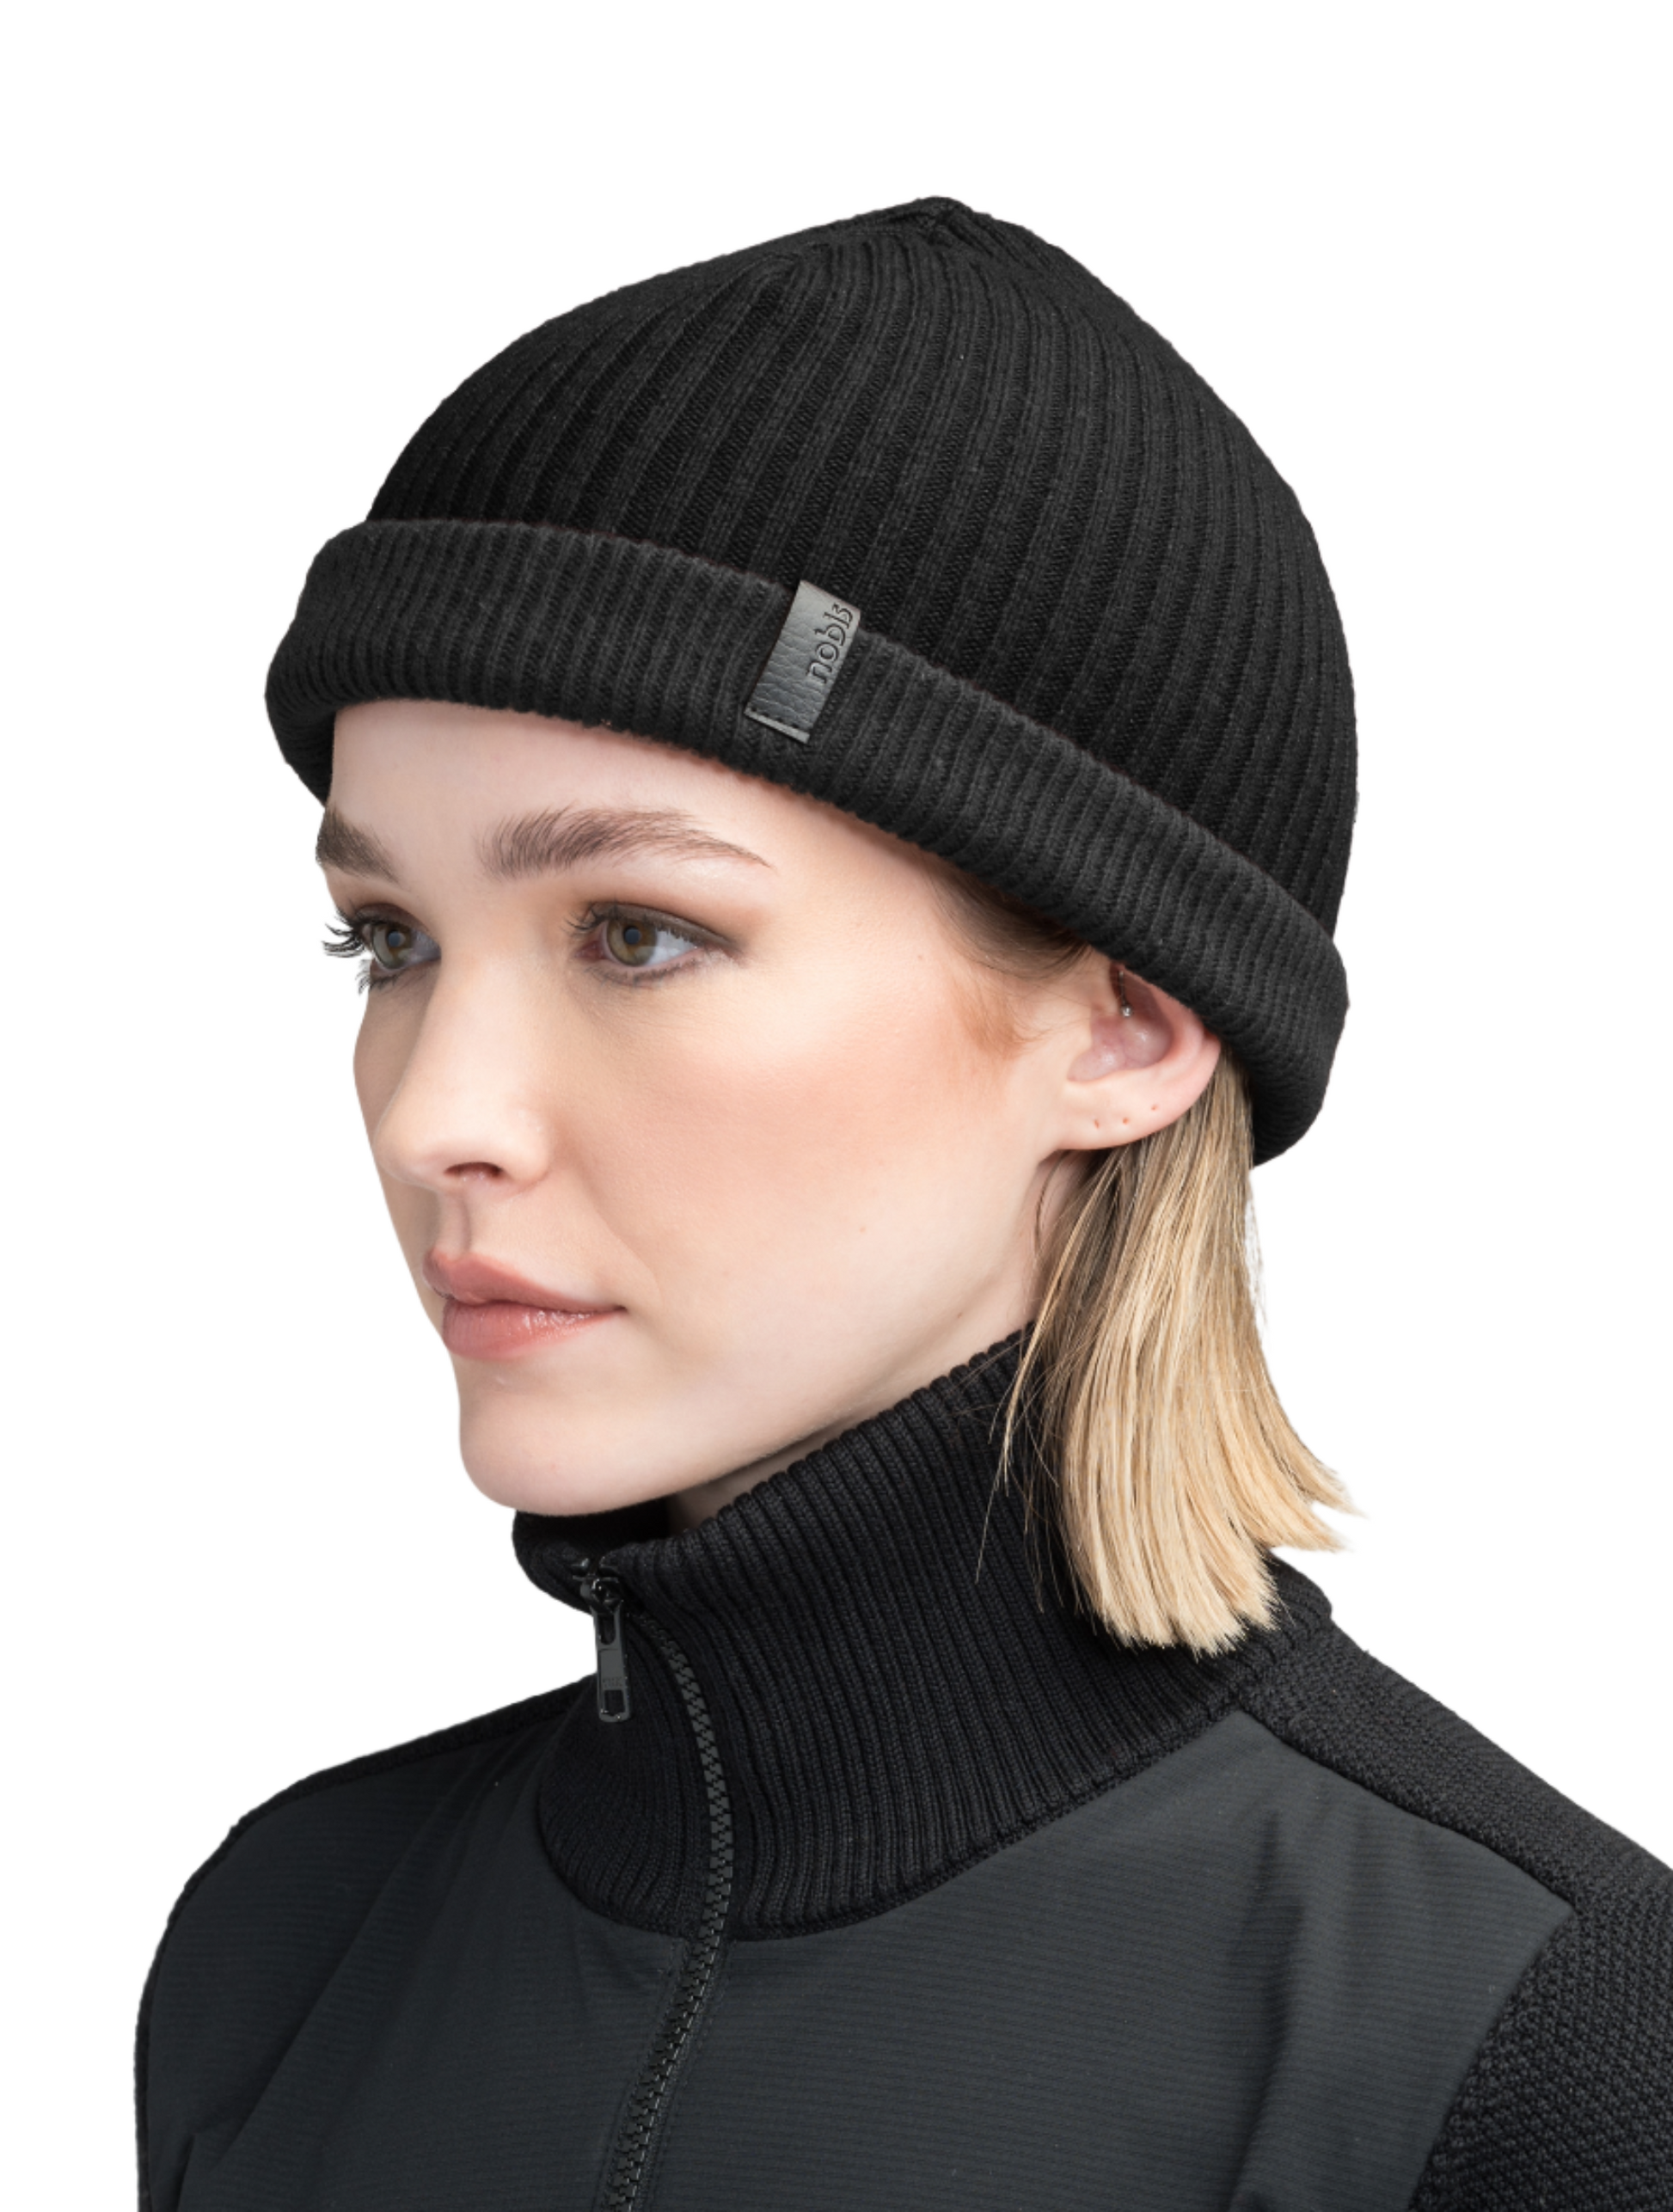 Ardn Unisex Tailored Reversible Knit Beanie in an extra fine merino wool blend, fitted rib knit, and reversible design, in Black